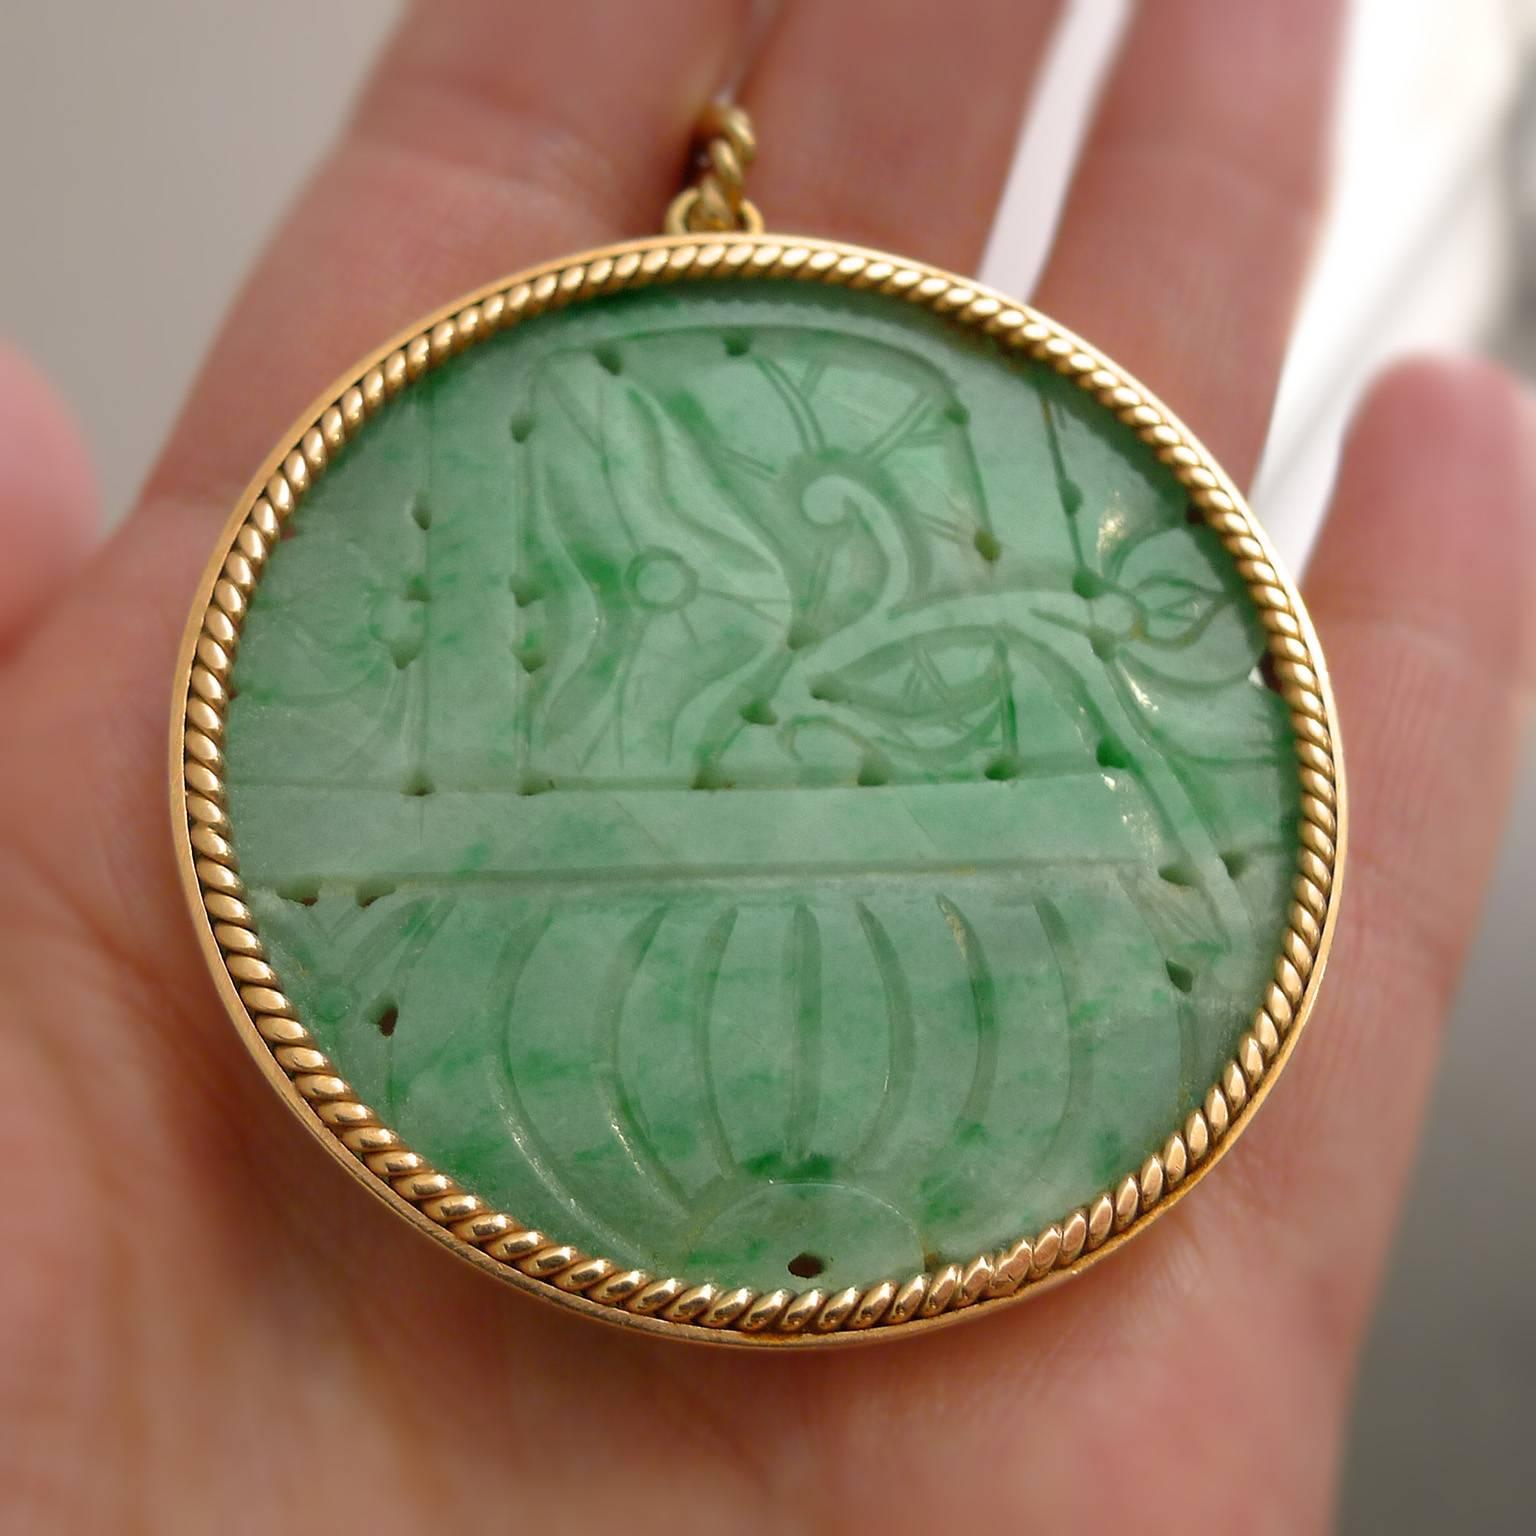 Carved and pierced Jadeite is grayish white with portions of intense apple green. Set in 14K yellow gold twisted wire bezel. 52.5 mm in diameter.